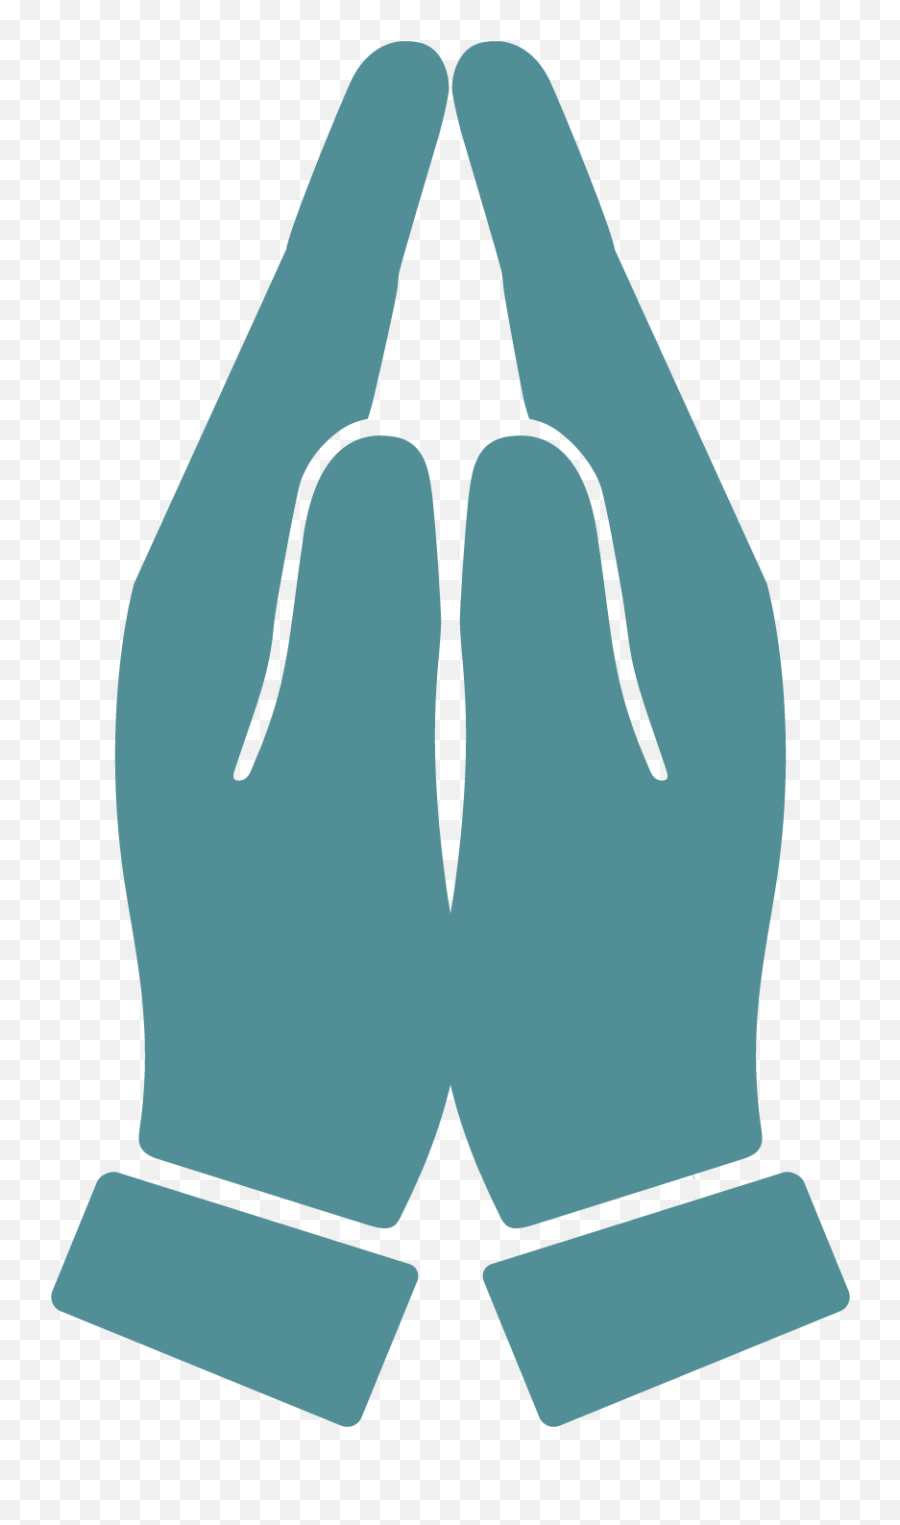 Prayer Hands Logo Png Image - Gardens By The Bay,Hands Logo